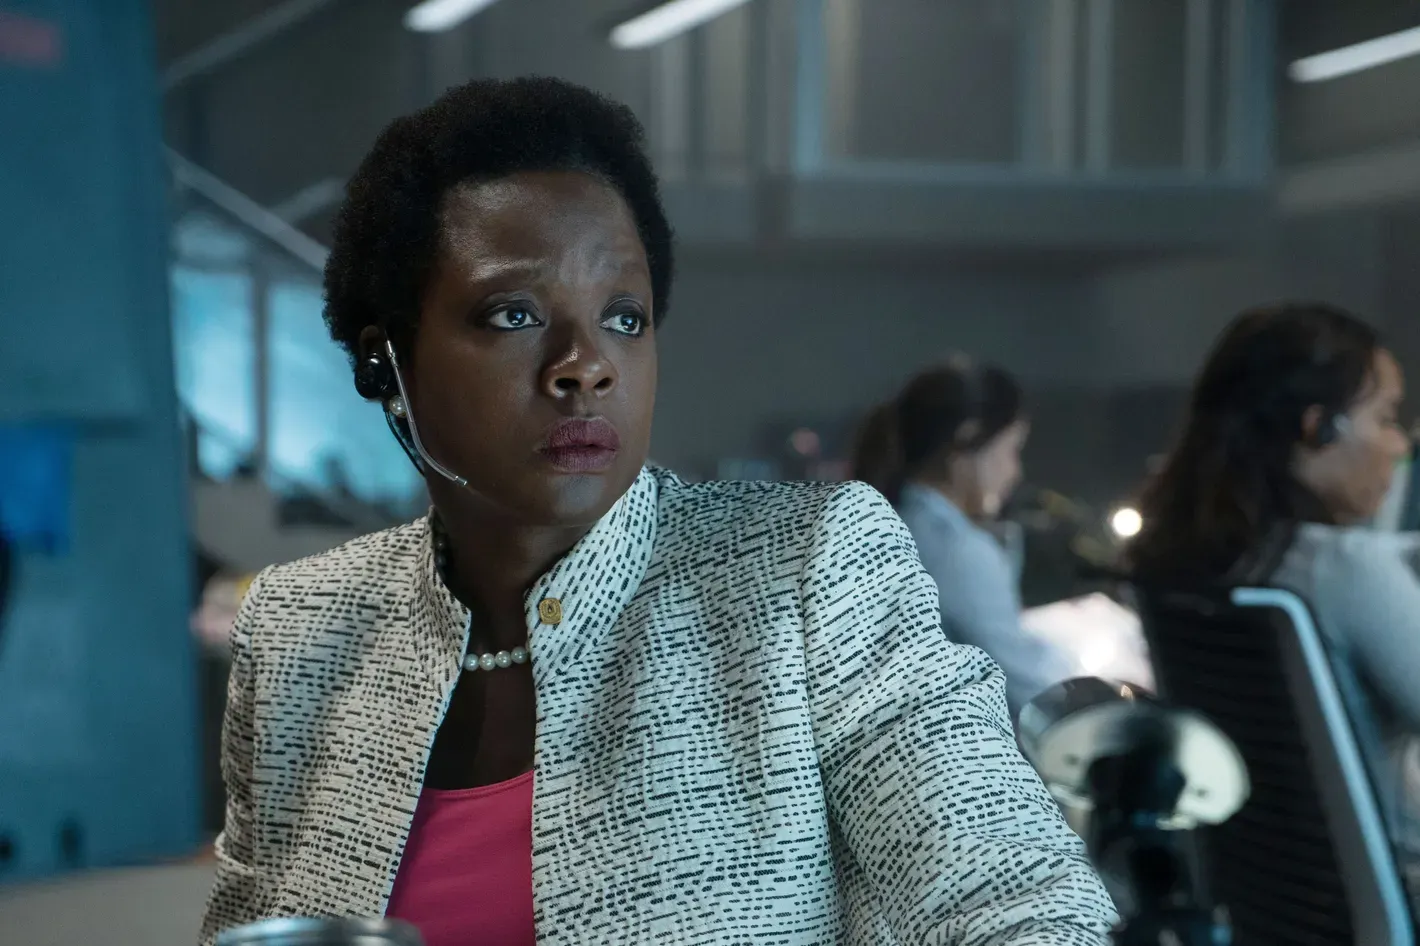 #New Amanda Waller Suicide Squad Spin-Off In The Works With Viola Davis Returning